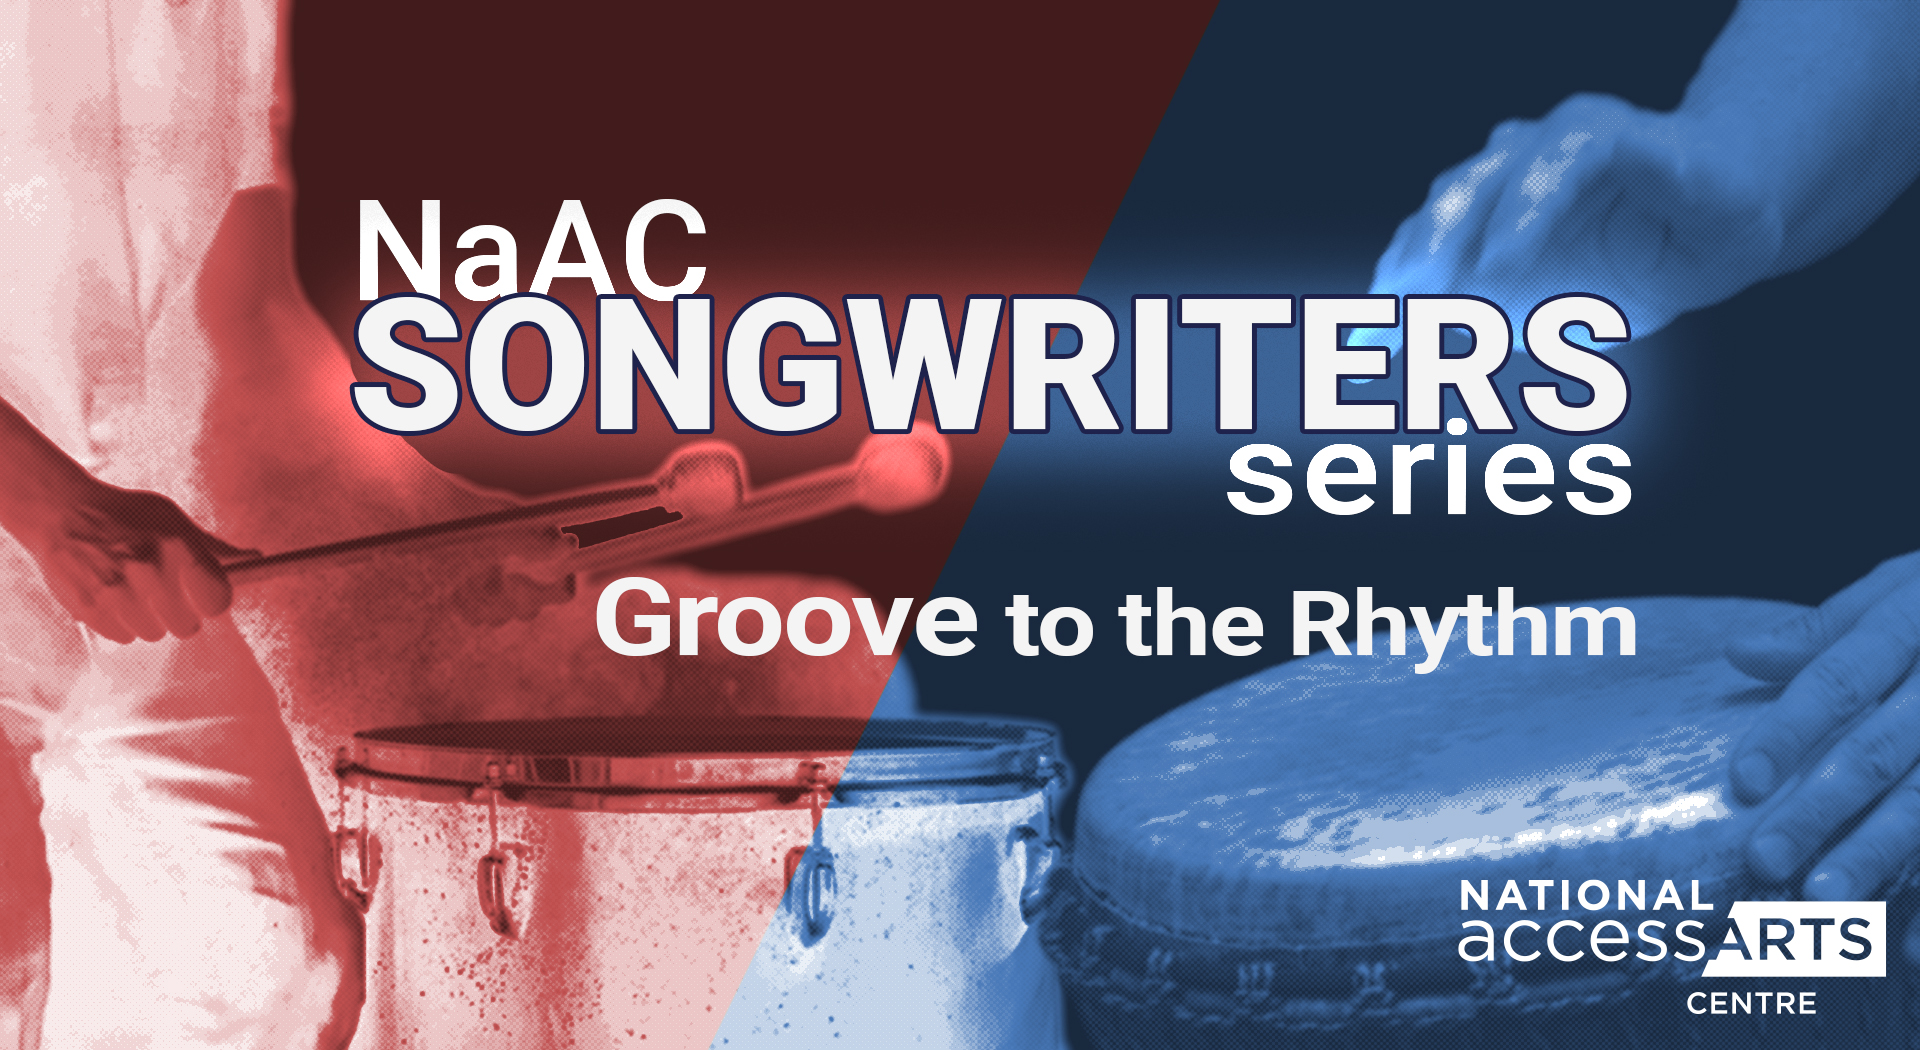 Two-tone workshop diagonally divided into two sections. Left side, with red overlay, shows a person playing a drum with mallets. Right side, with blue overlay, displays someone playing a djembe. Workshop title text: “NaAC Songwriters Groove to the Rhythm”.